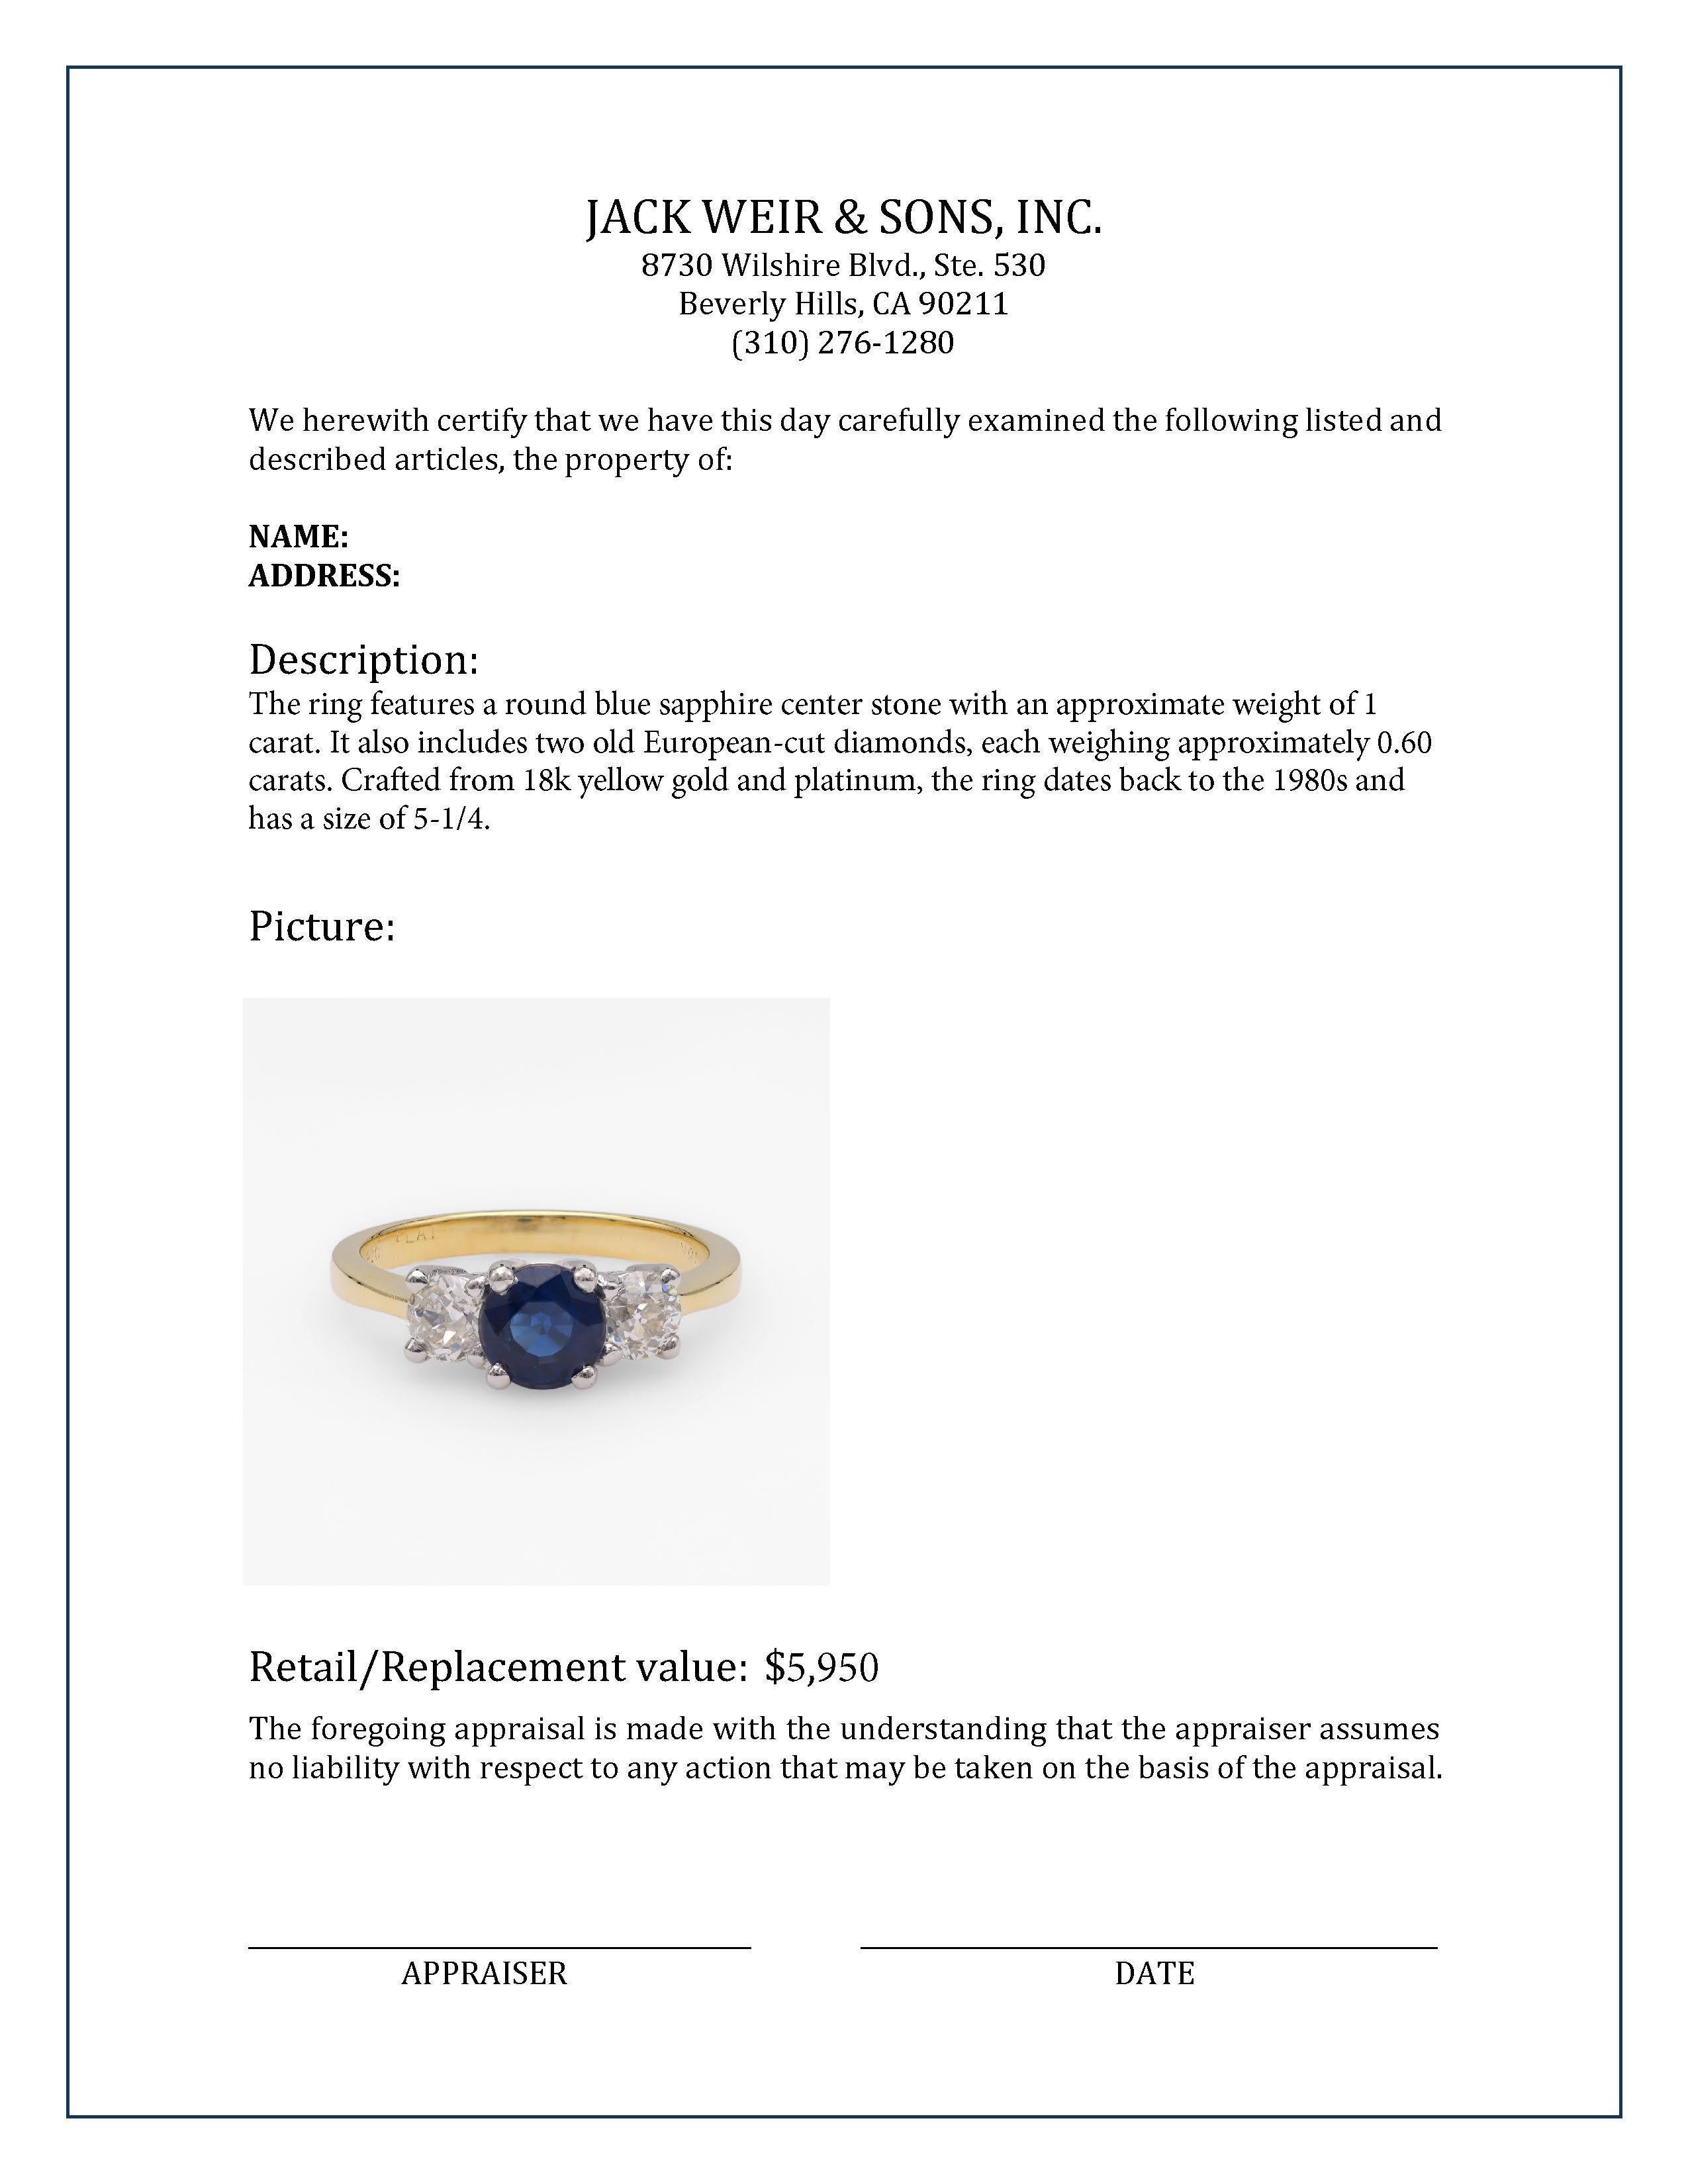 Sapphire Diamond Yellow Gold & Platinum Three Stone Ring In Excellent Condition For Sale In Beverly Hills, CA